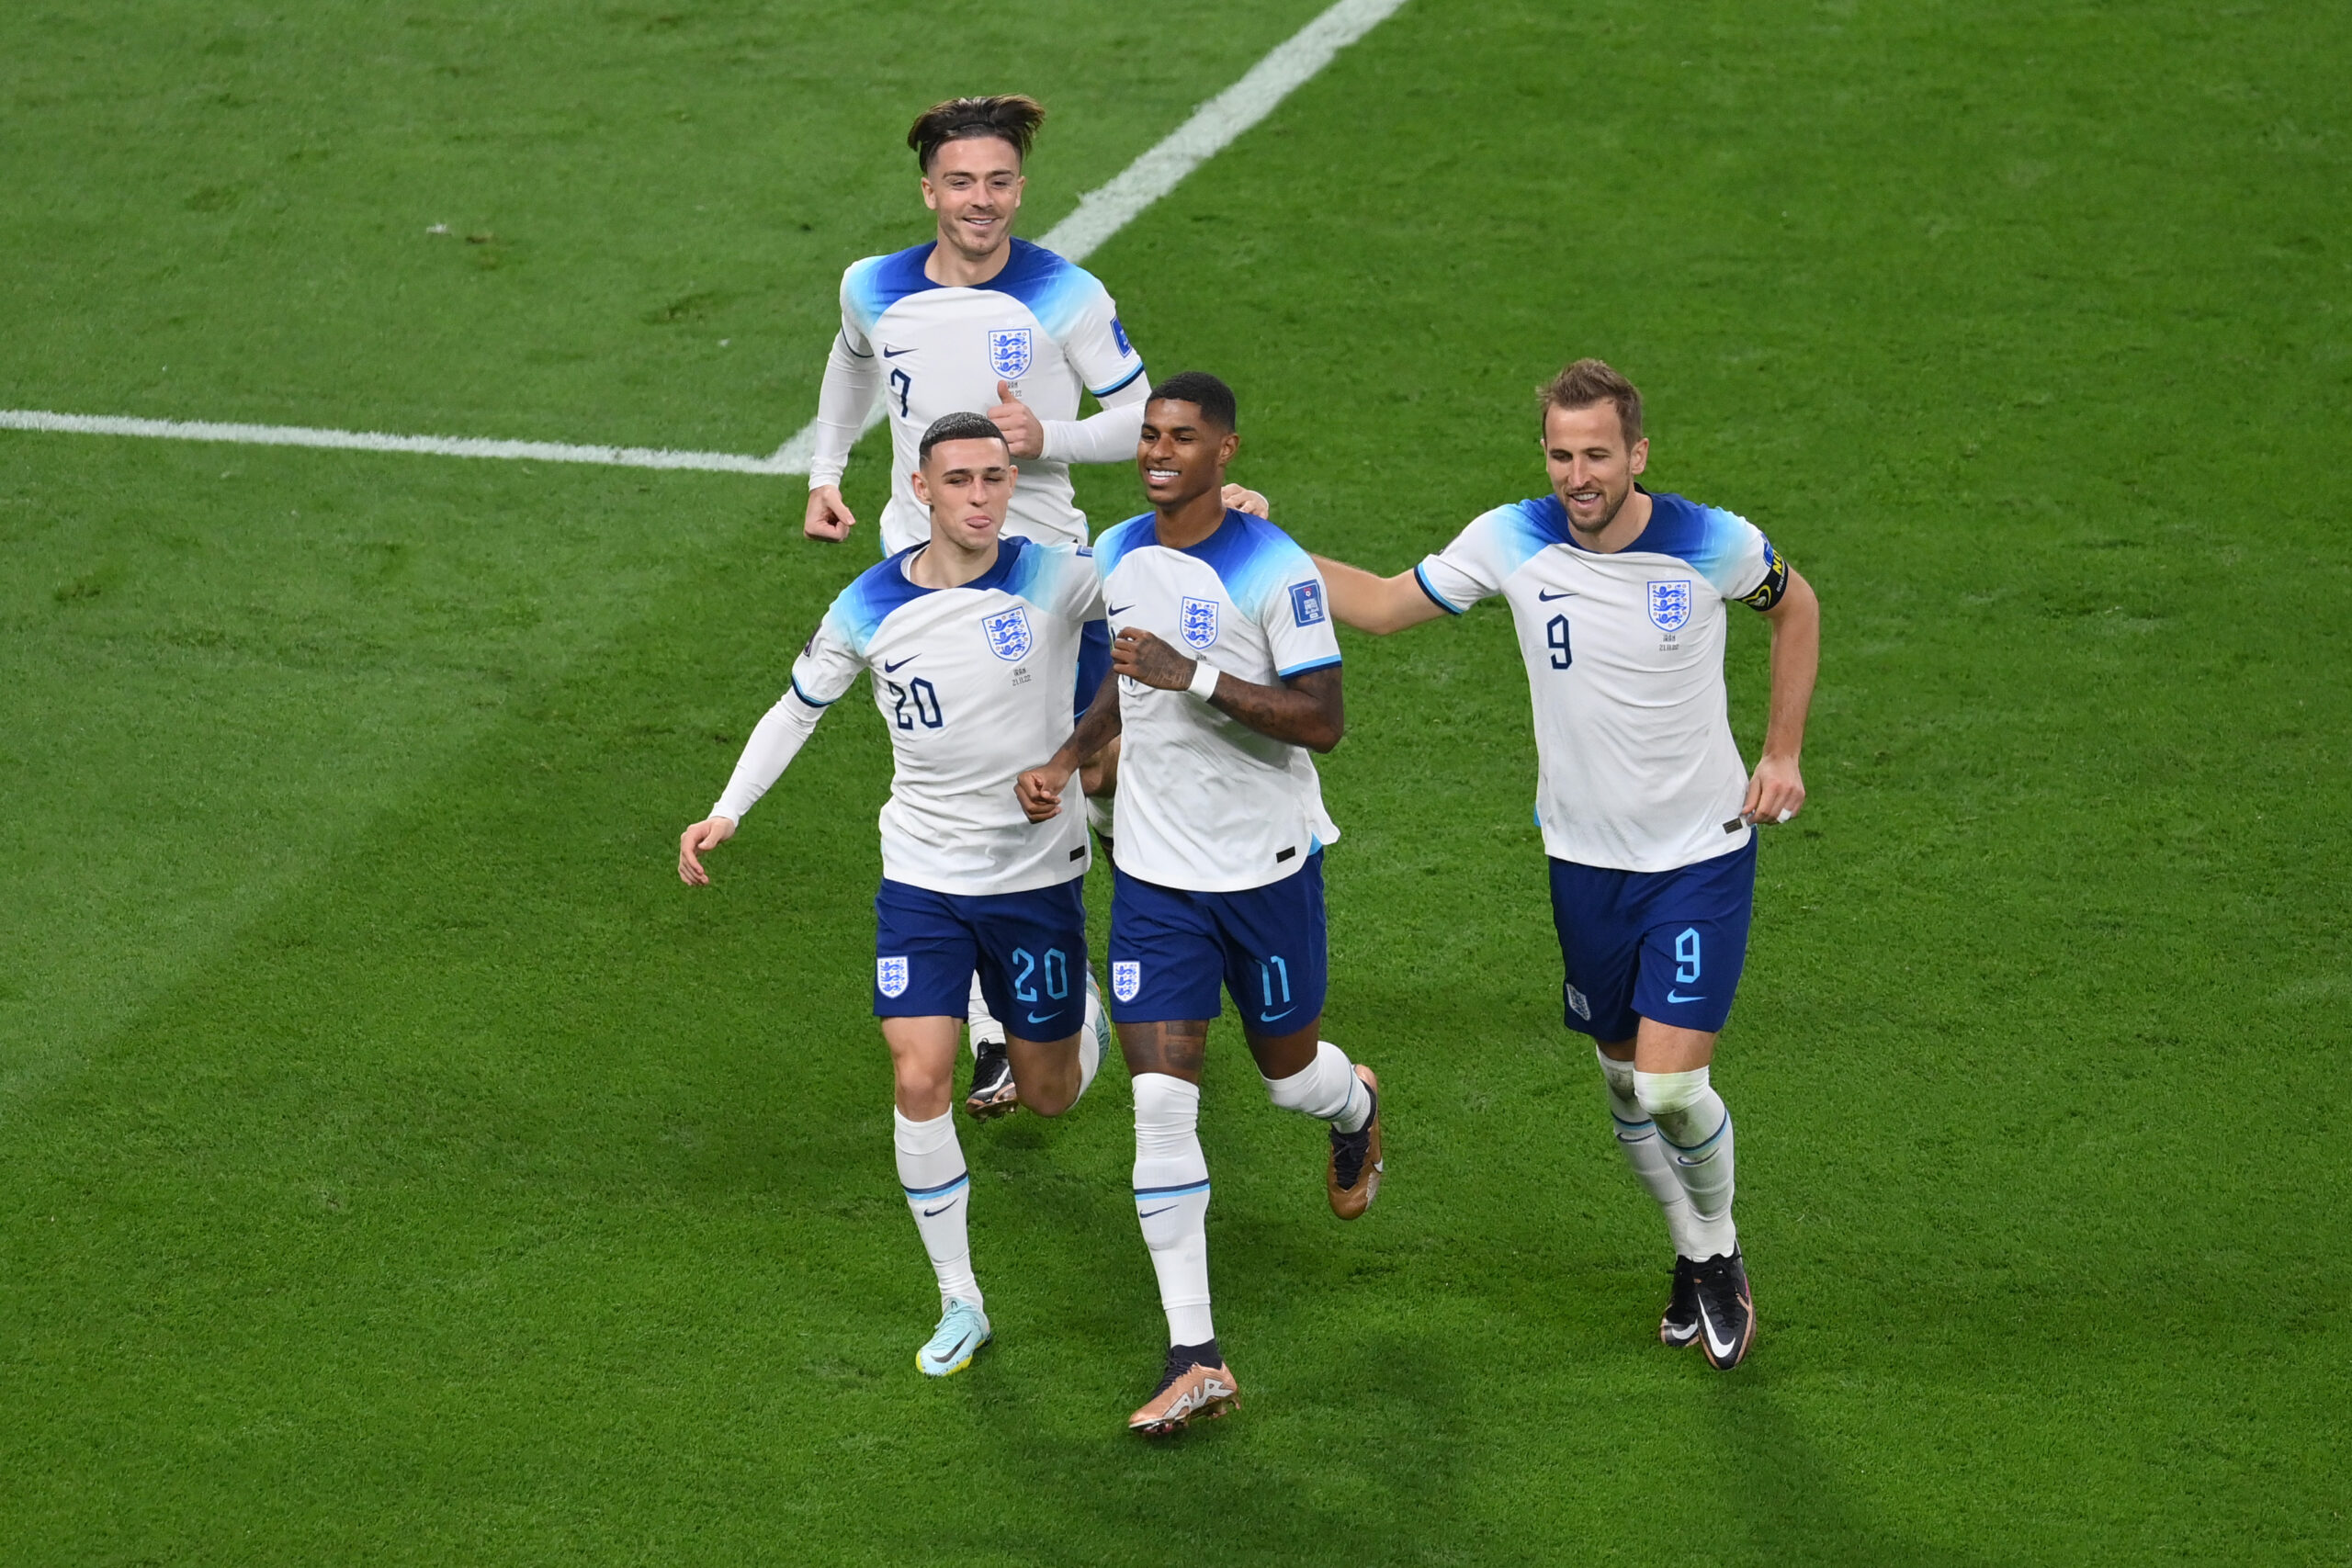 England-Iran, a great victory for England in the 2022 World Cup